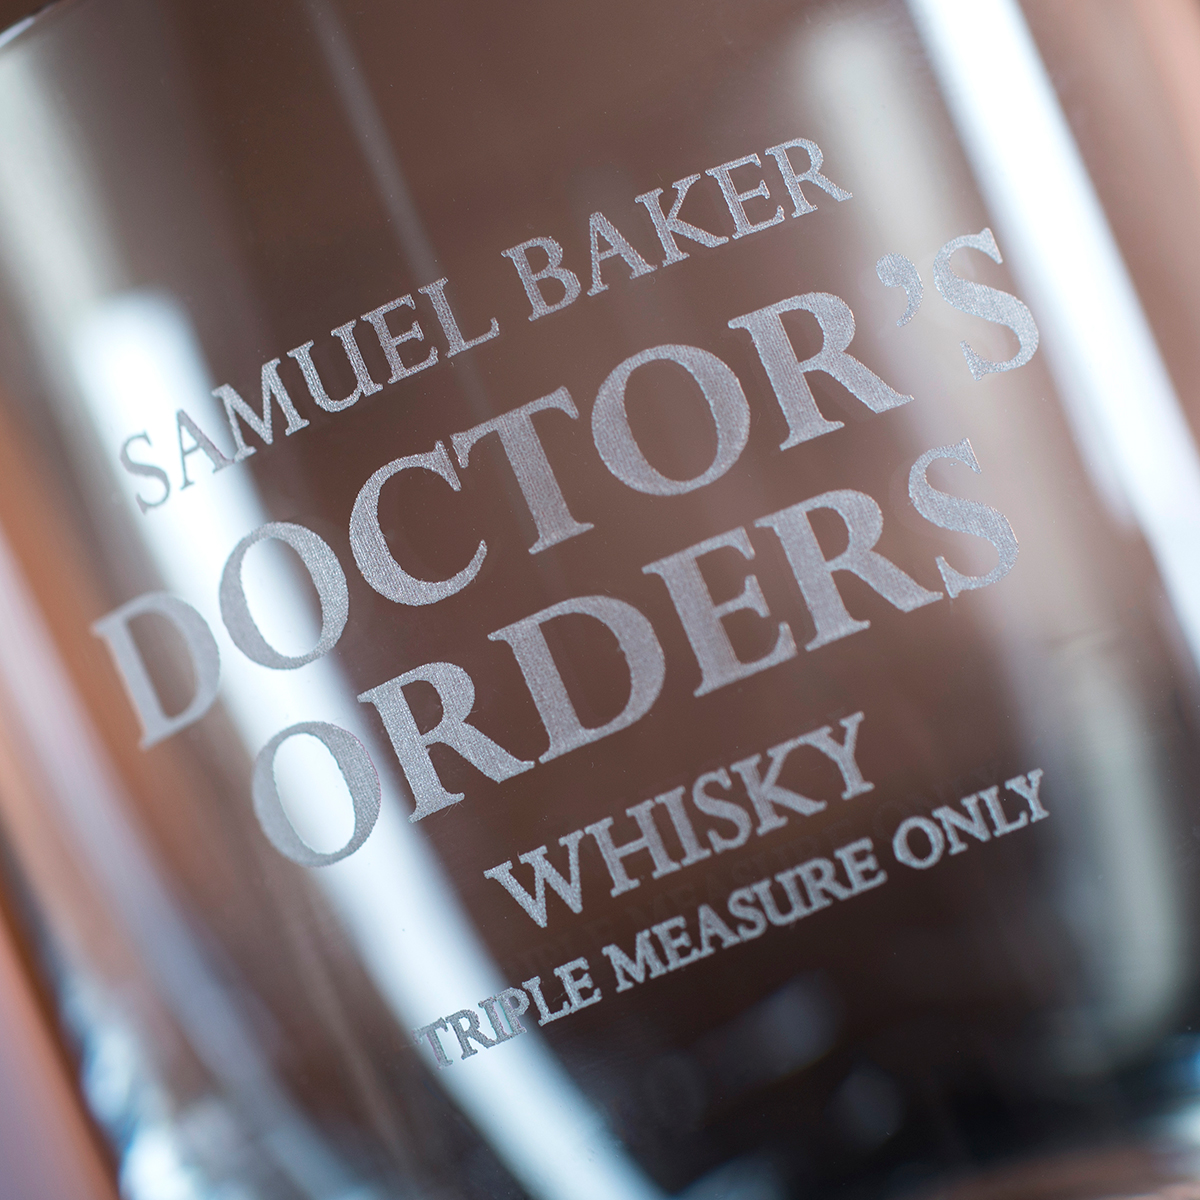 Engraved Stern Whisky Glass - Doctor's Orders